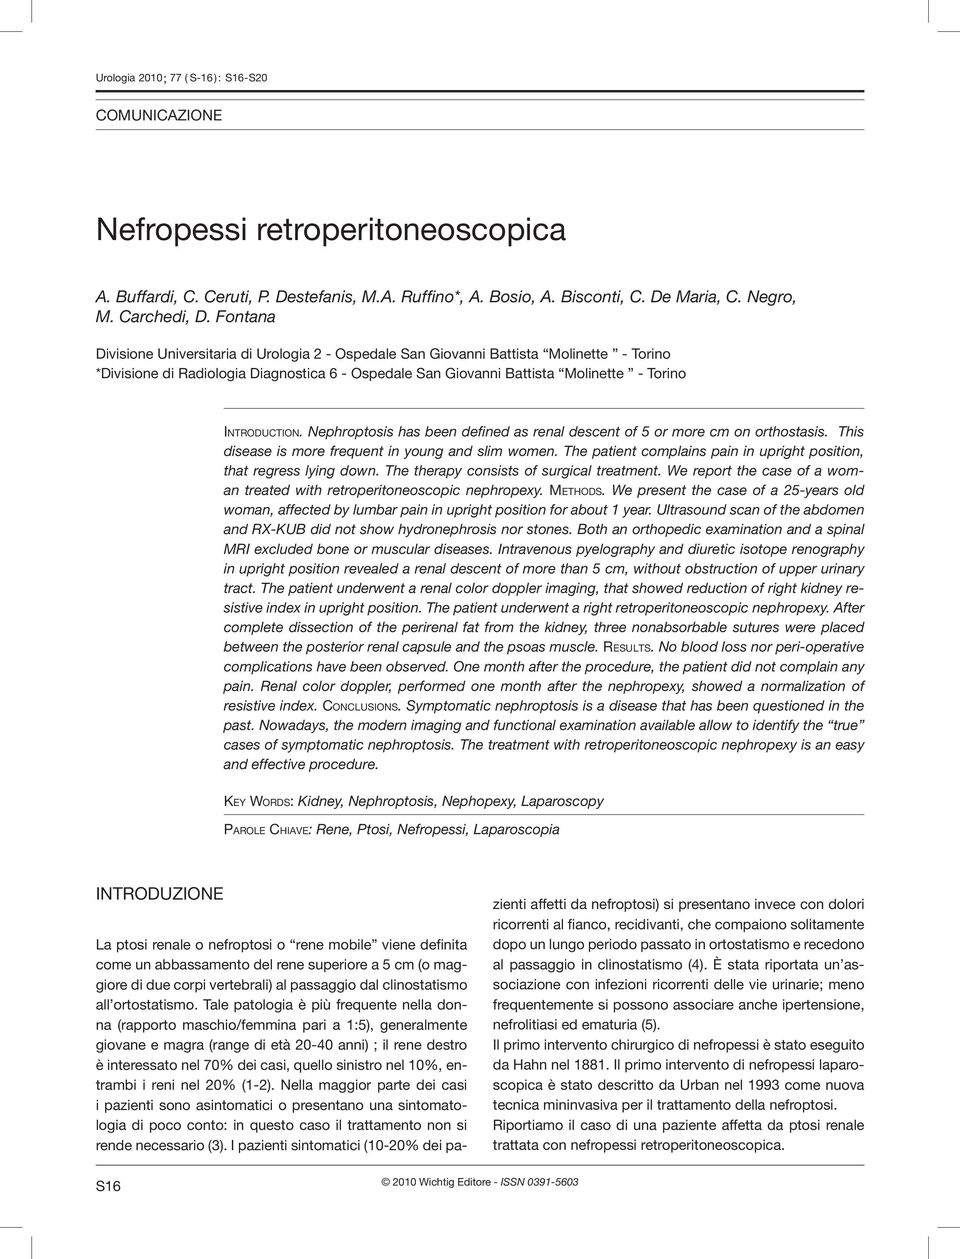 IntroductIon. Nephroptosis has been defined as renal descent of 5 or more cm on orthostasis. This disease is more frequent in young and slim women.